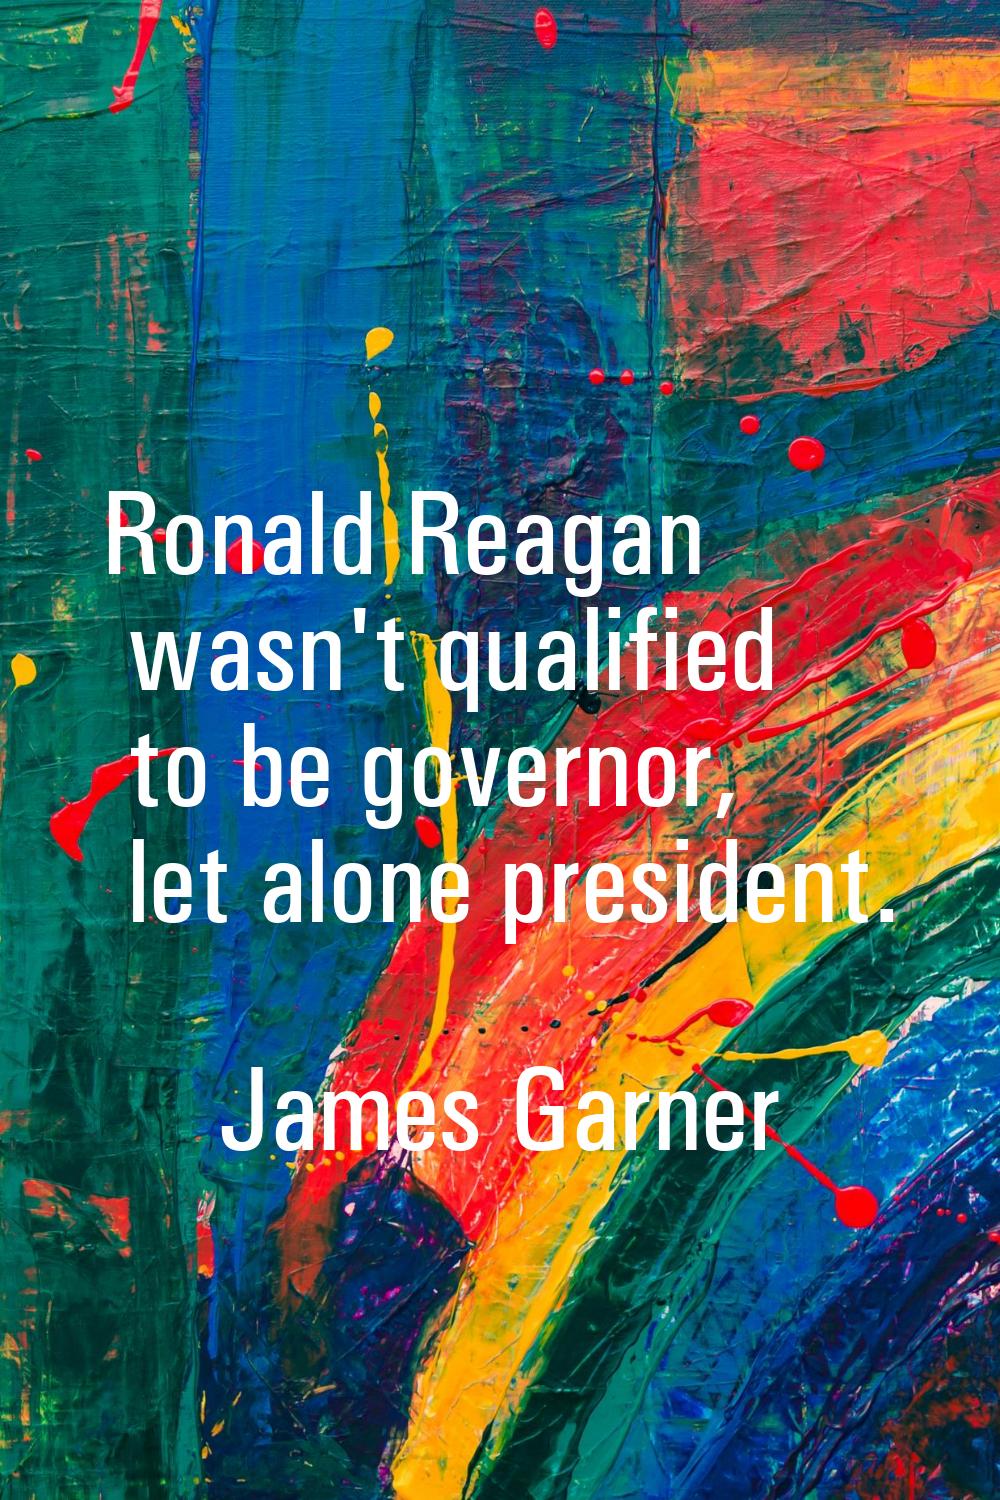 Ronald Reagan wasn't qualified to be governor, let alone president.